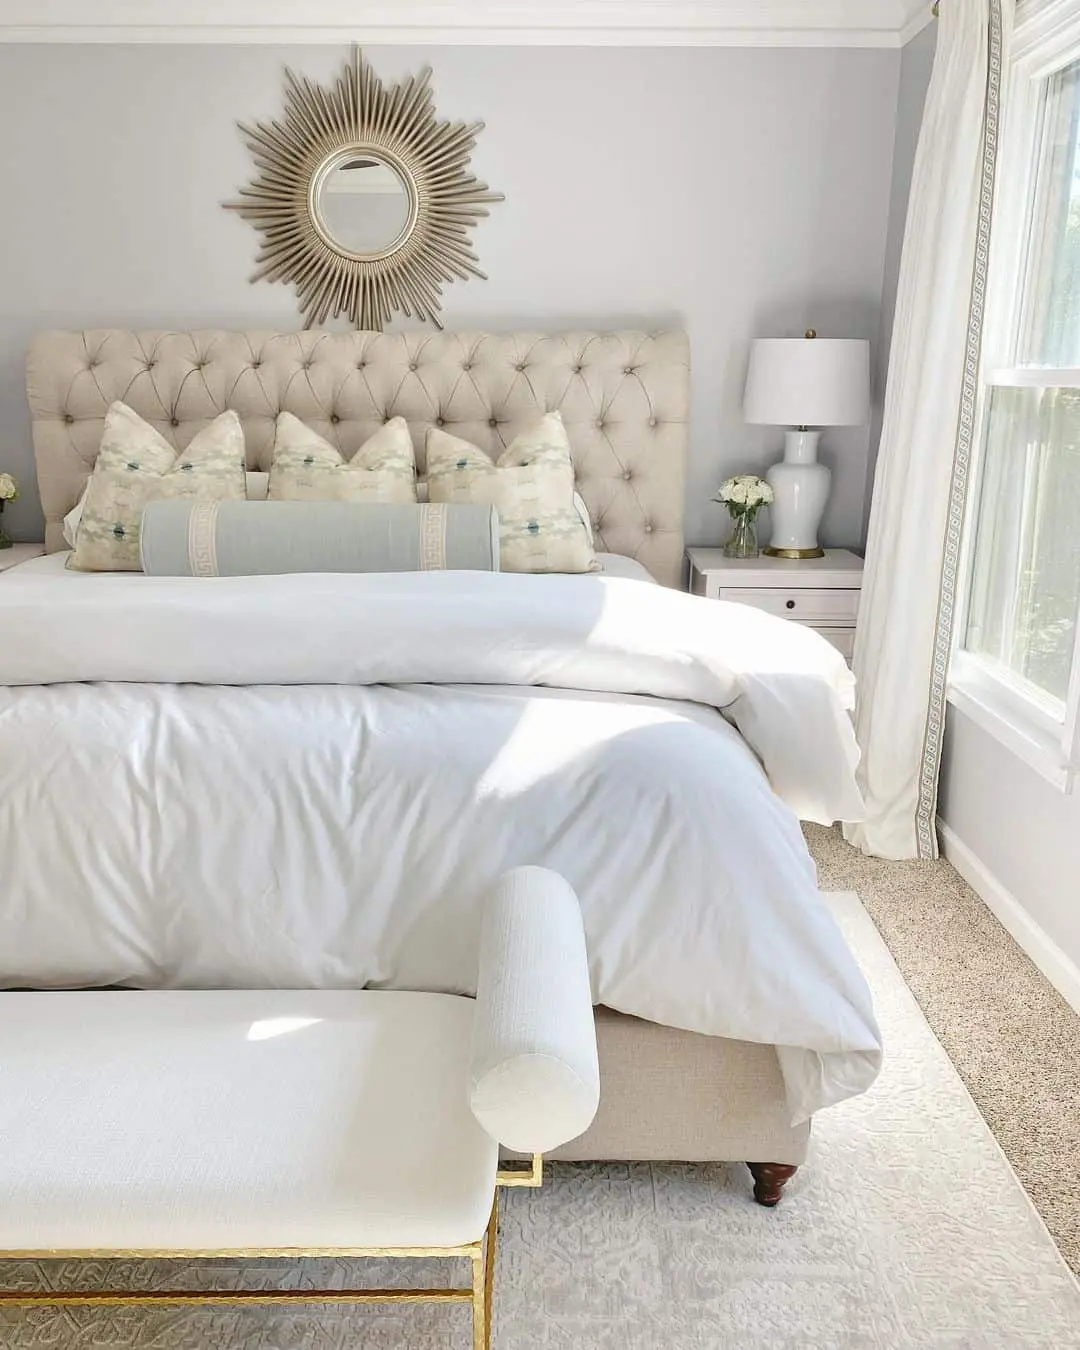 A Subtle Touch of Blue in a White Bedroom